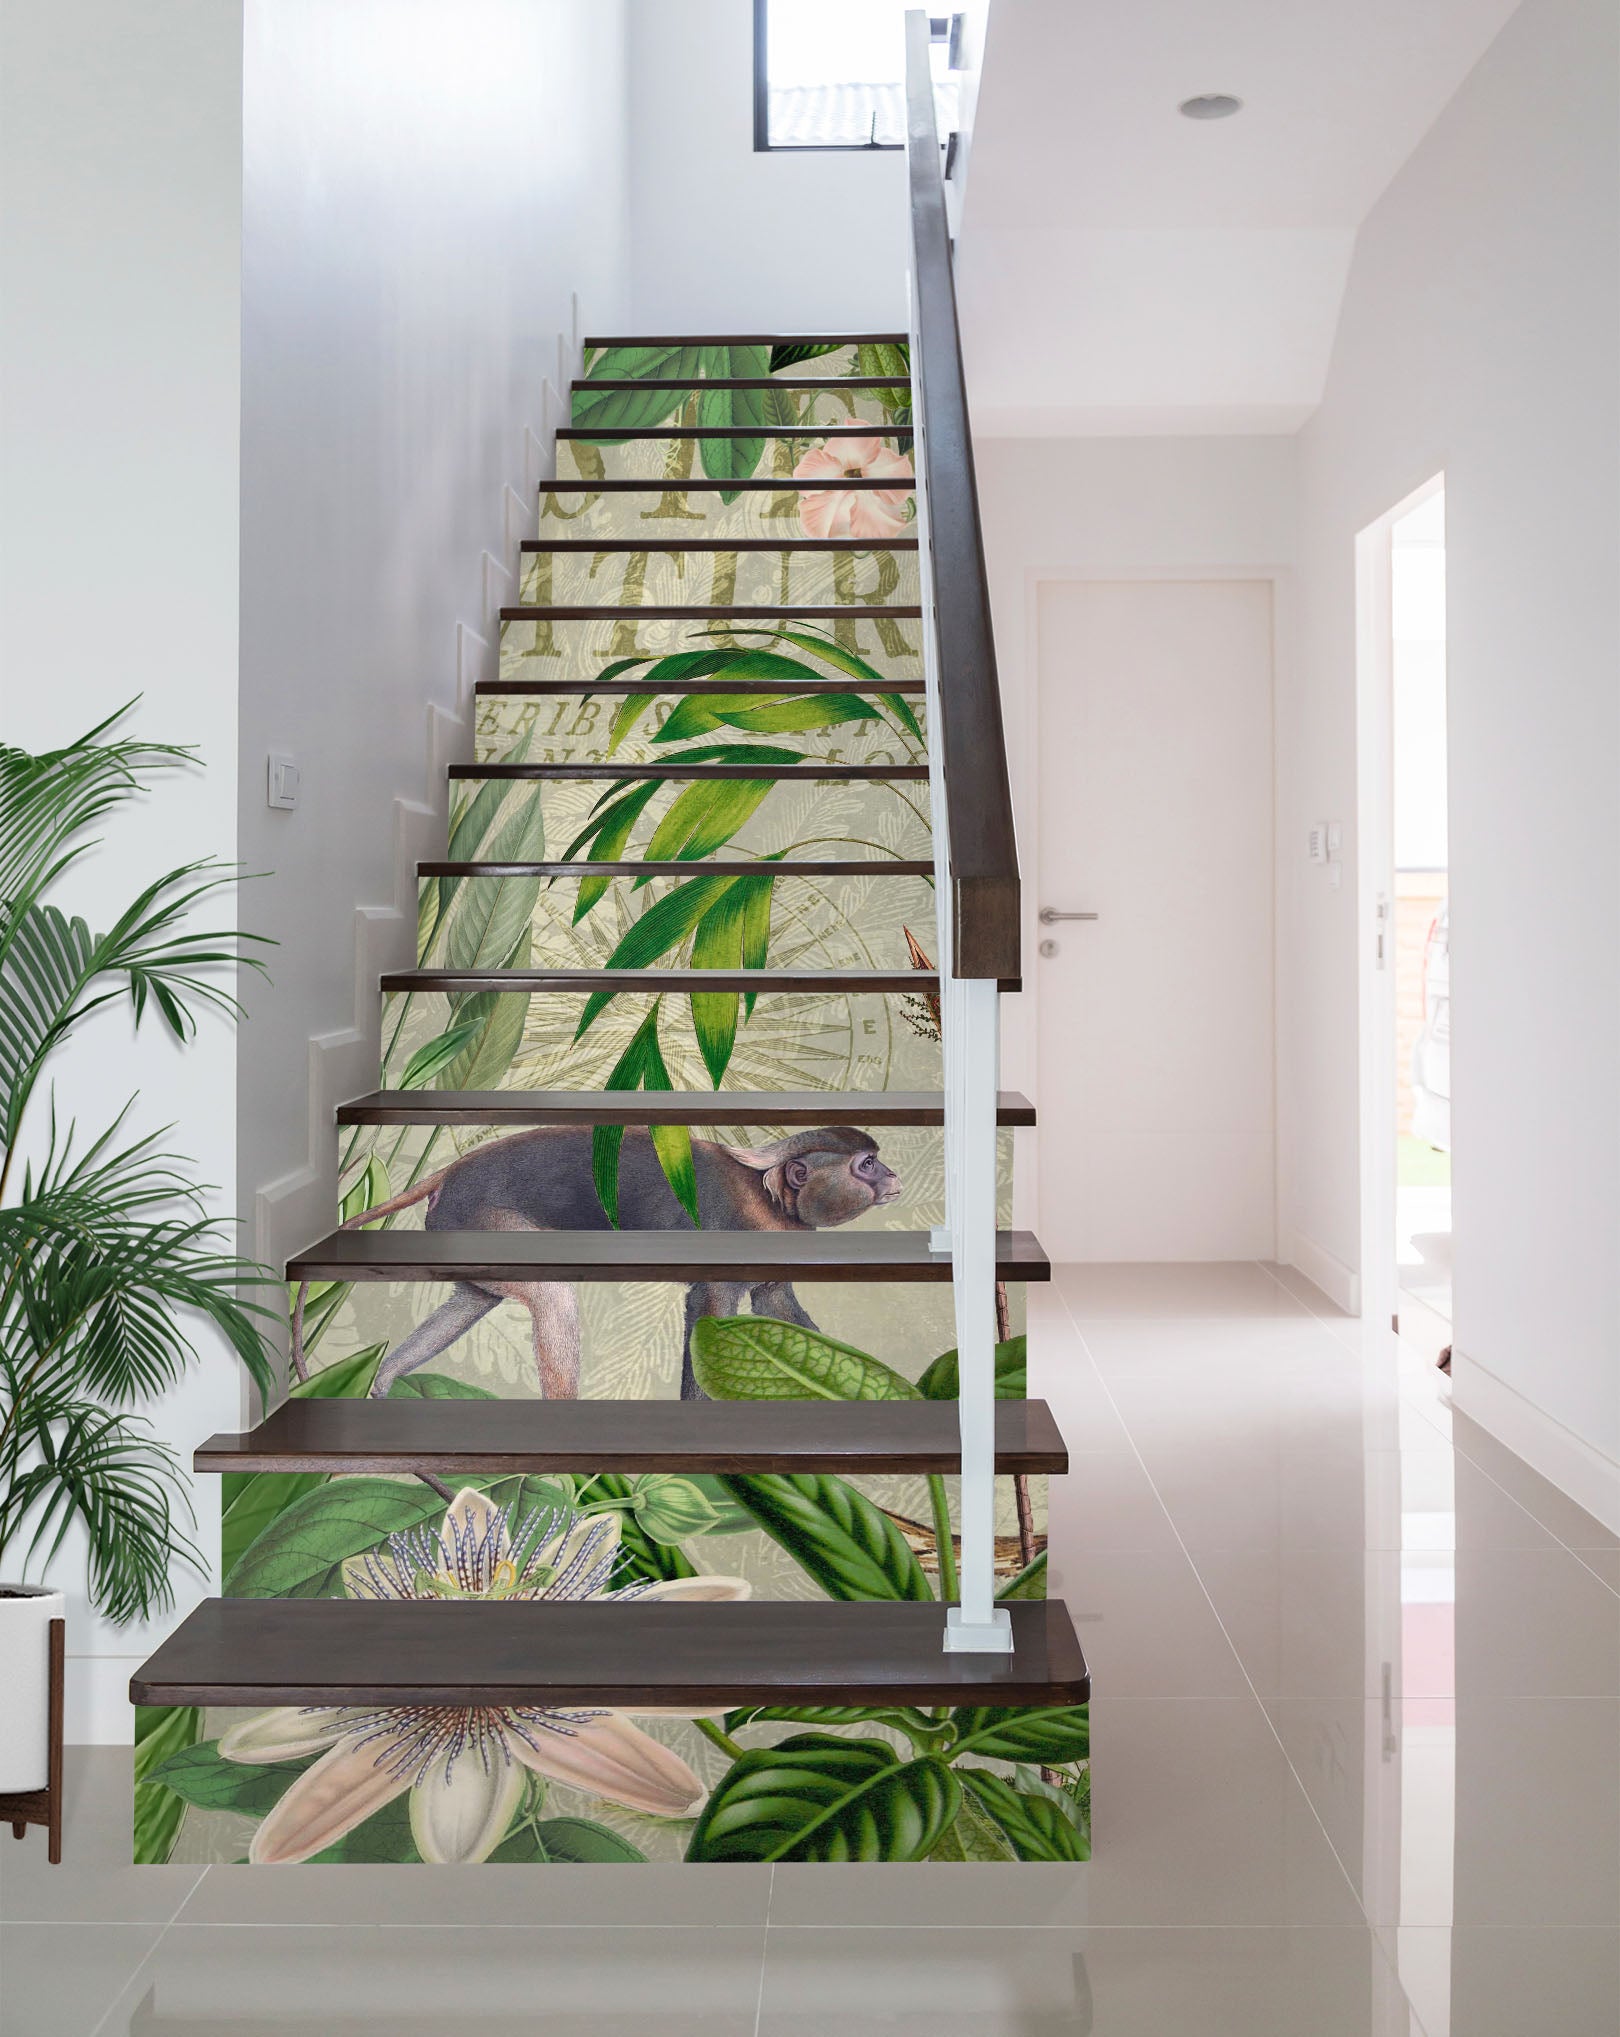 3D Leaves Monkey 11037 Andrea Haase Stair Risers